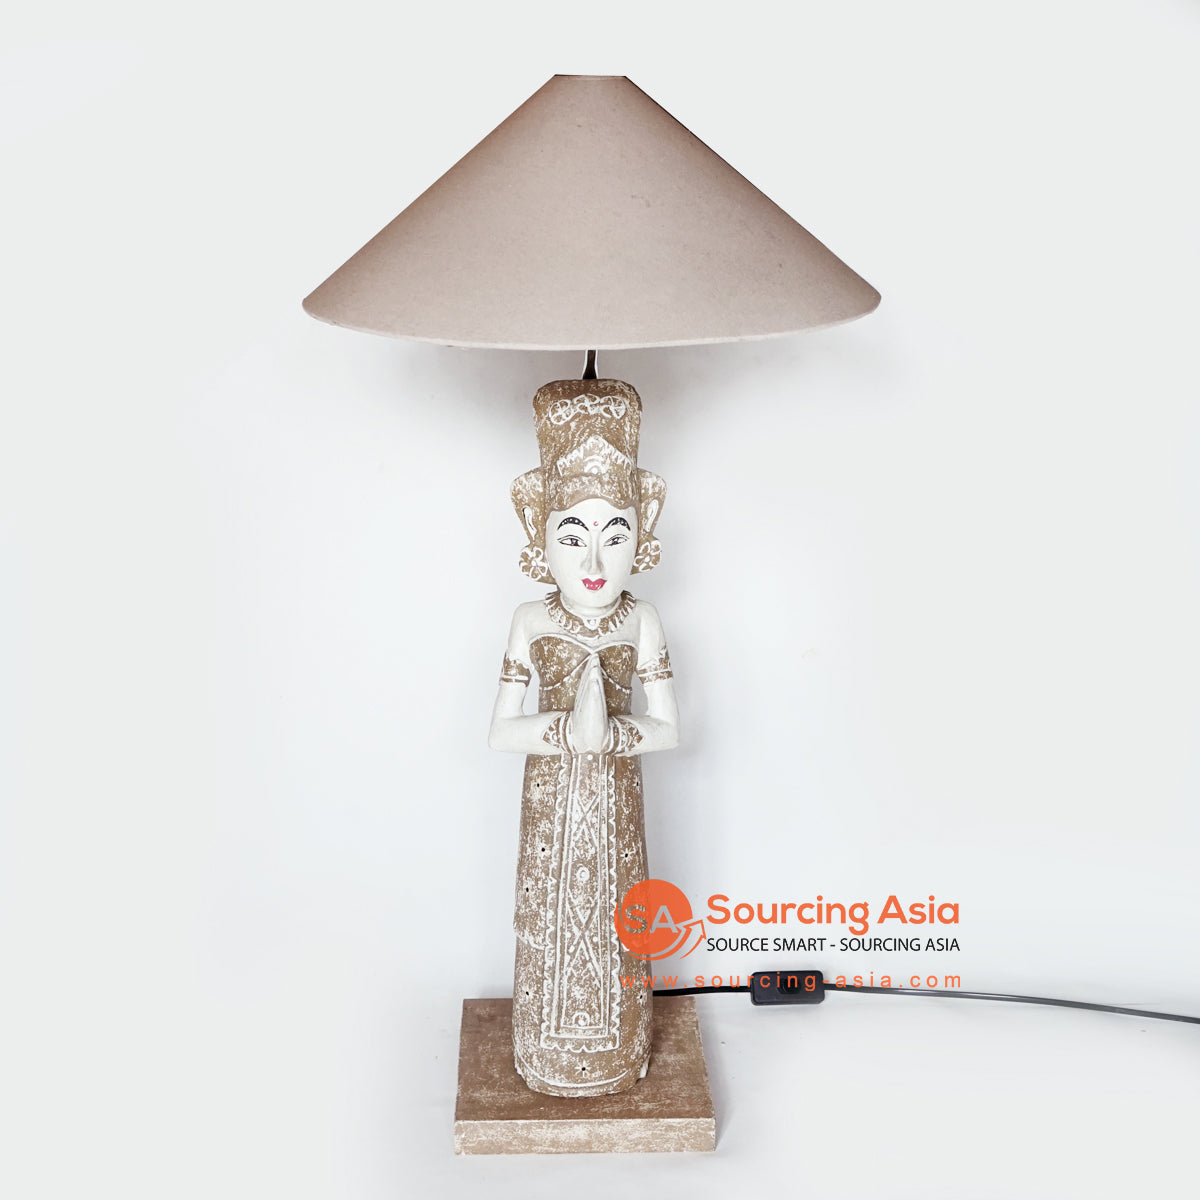 MANC090 WOODEN STANDING LAMP WITH BALINESE WOMAN STATUE AND LAMP SHADE